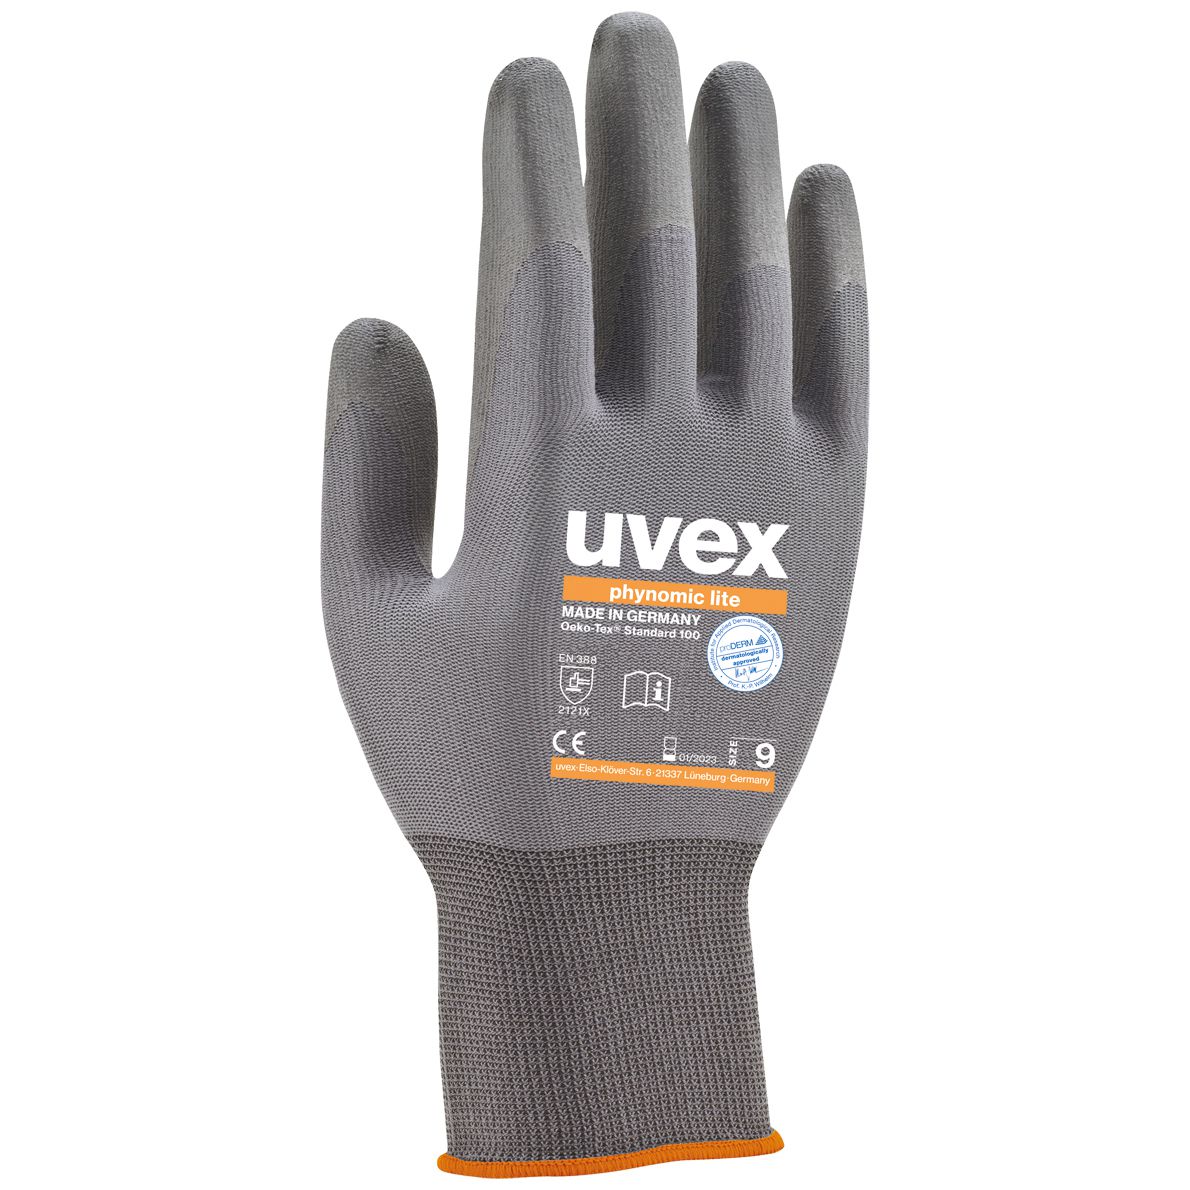 1 pair of uvex phynomic lite assembly gloves - work gloves according to EN 388